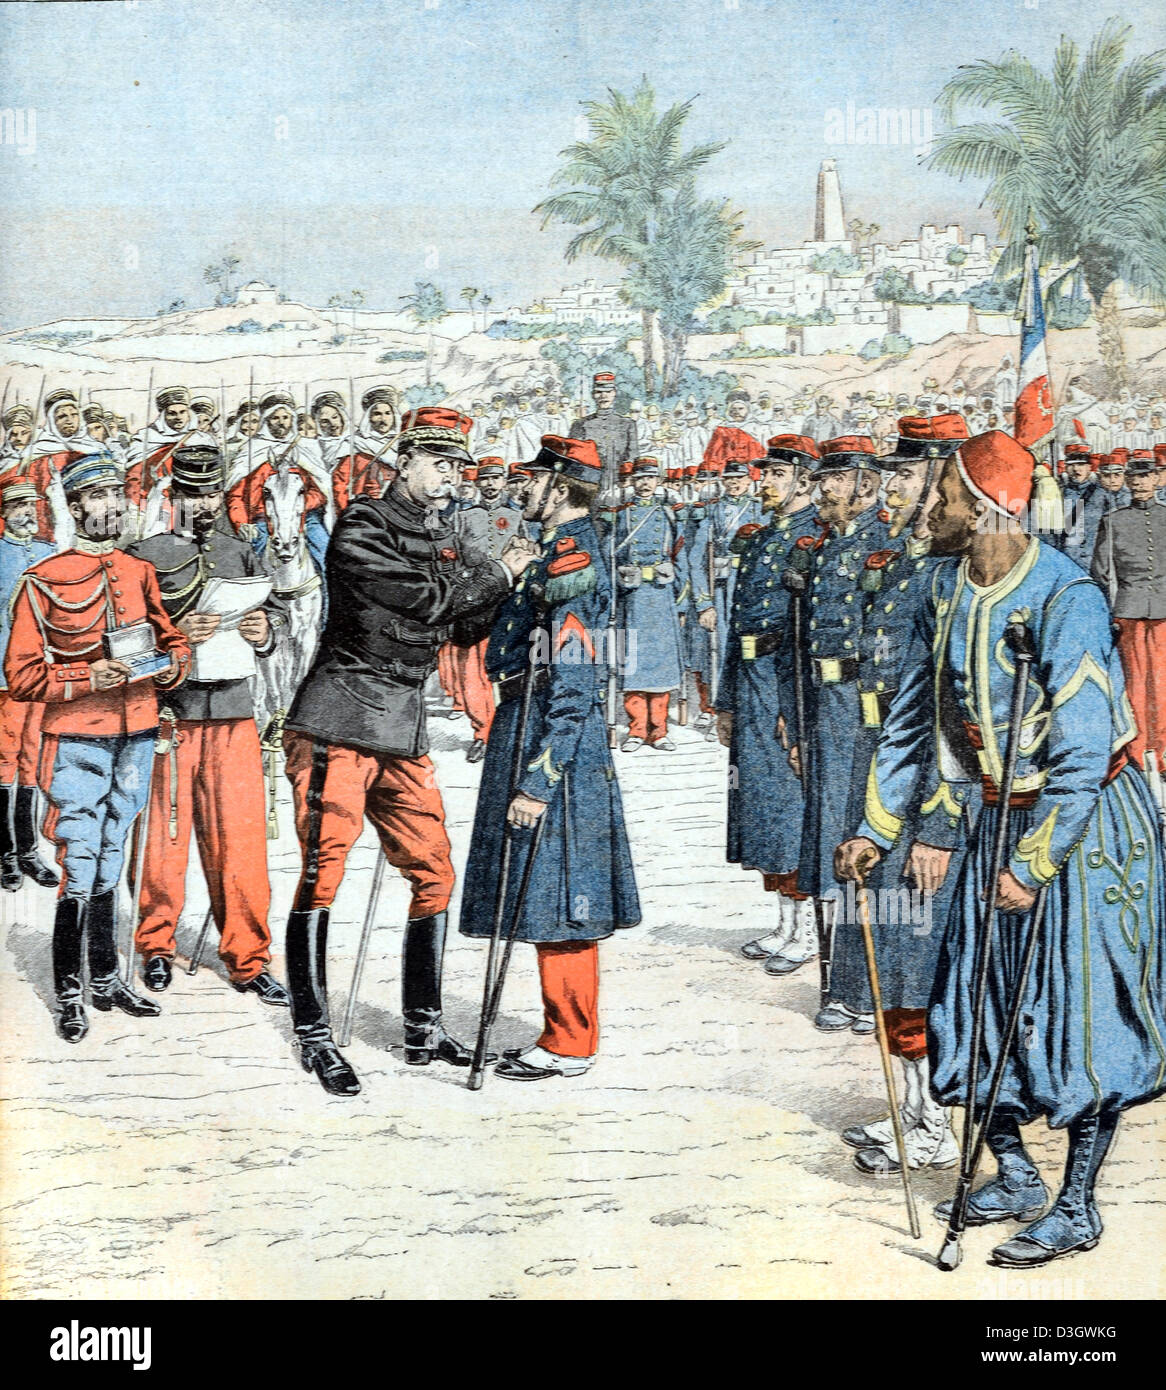 War Medals Awarded to French Soldiers in Algeria (February 1904) Vintage Illustration or Engraving Stock Photo